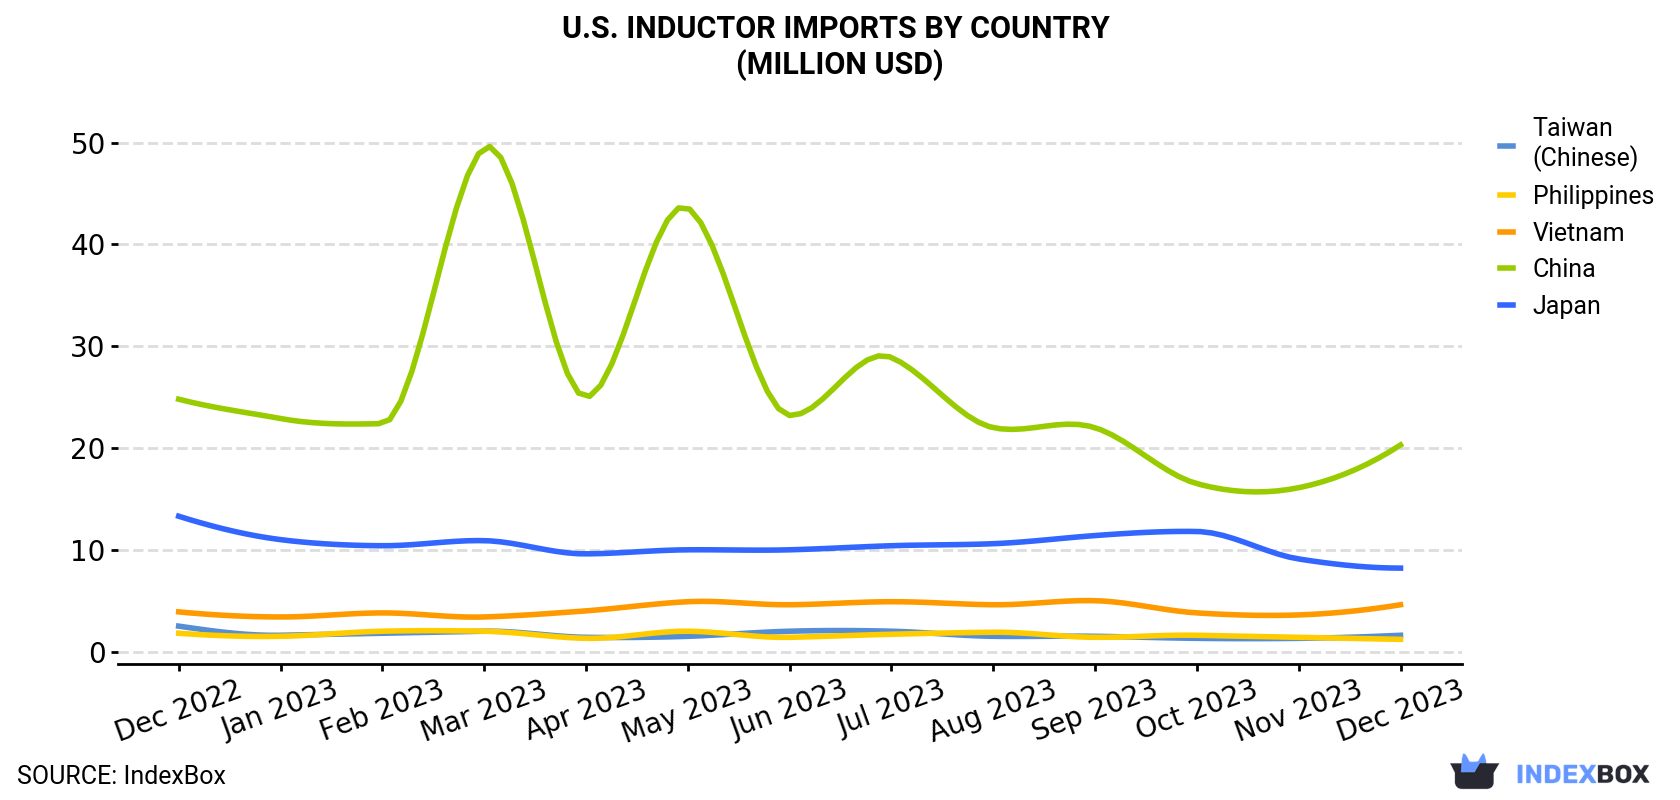 U.S. Inductor Imports By Country (Million USD)